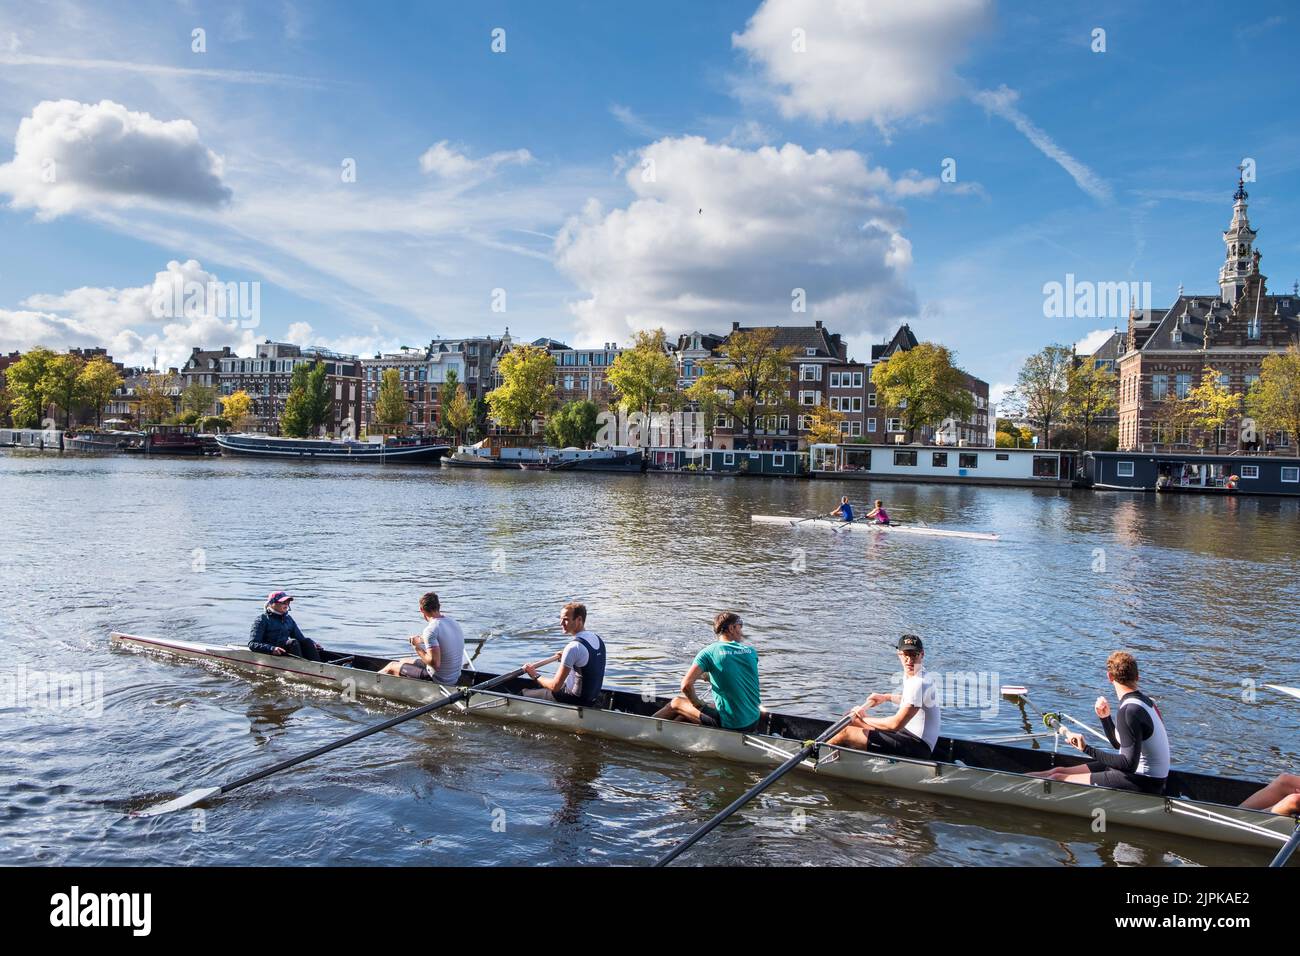 Crewing along the Amstel River in early Autumn, Amsterdam, Netherlands Stock Photo